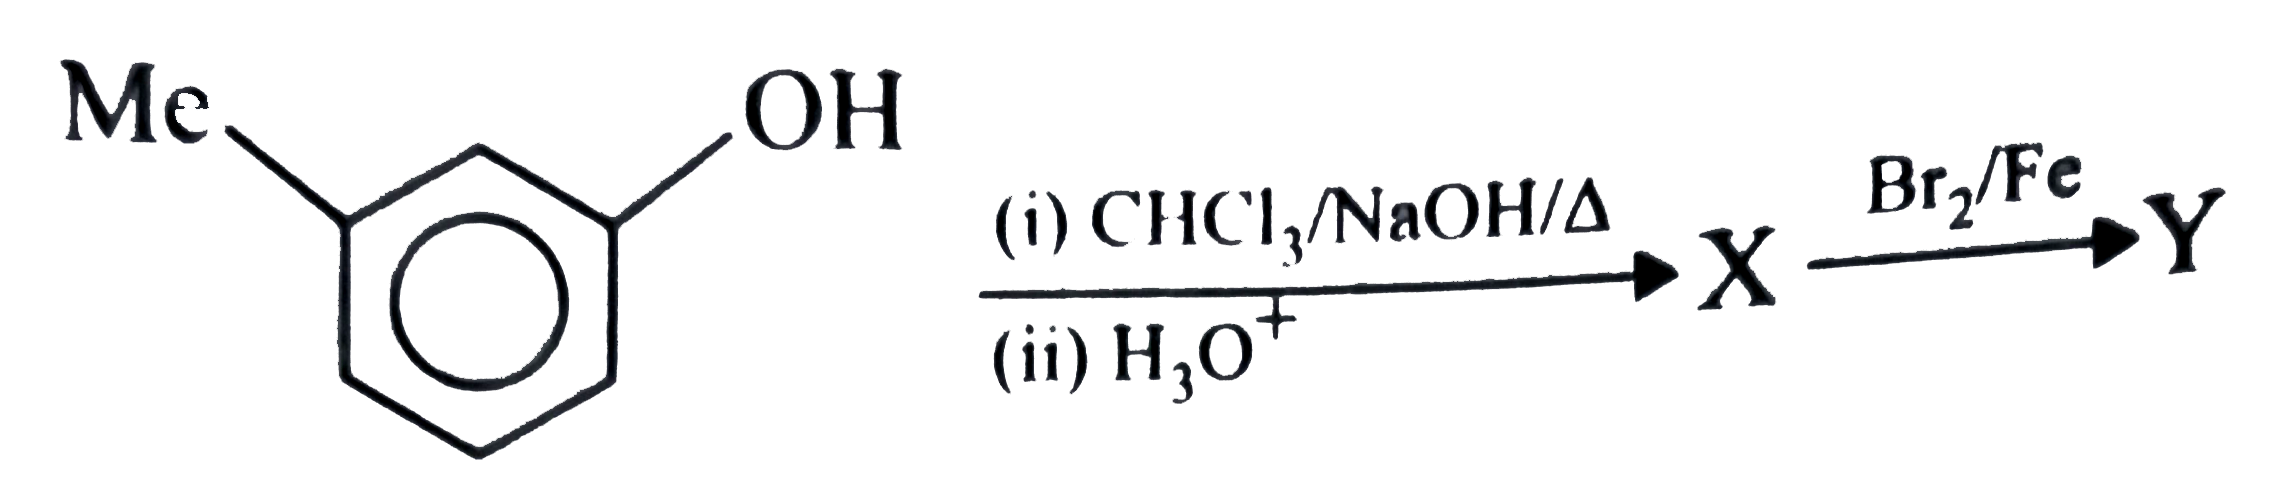 The product (Y) of the following sequence of the reactions would be